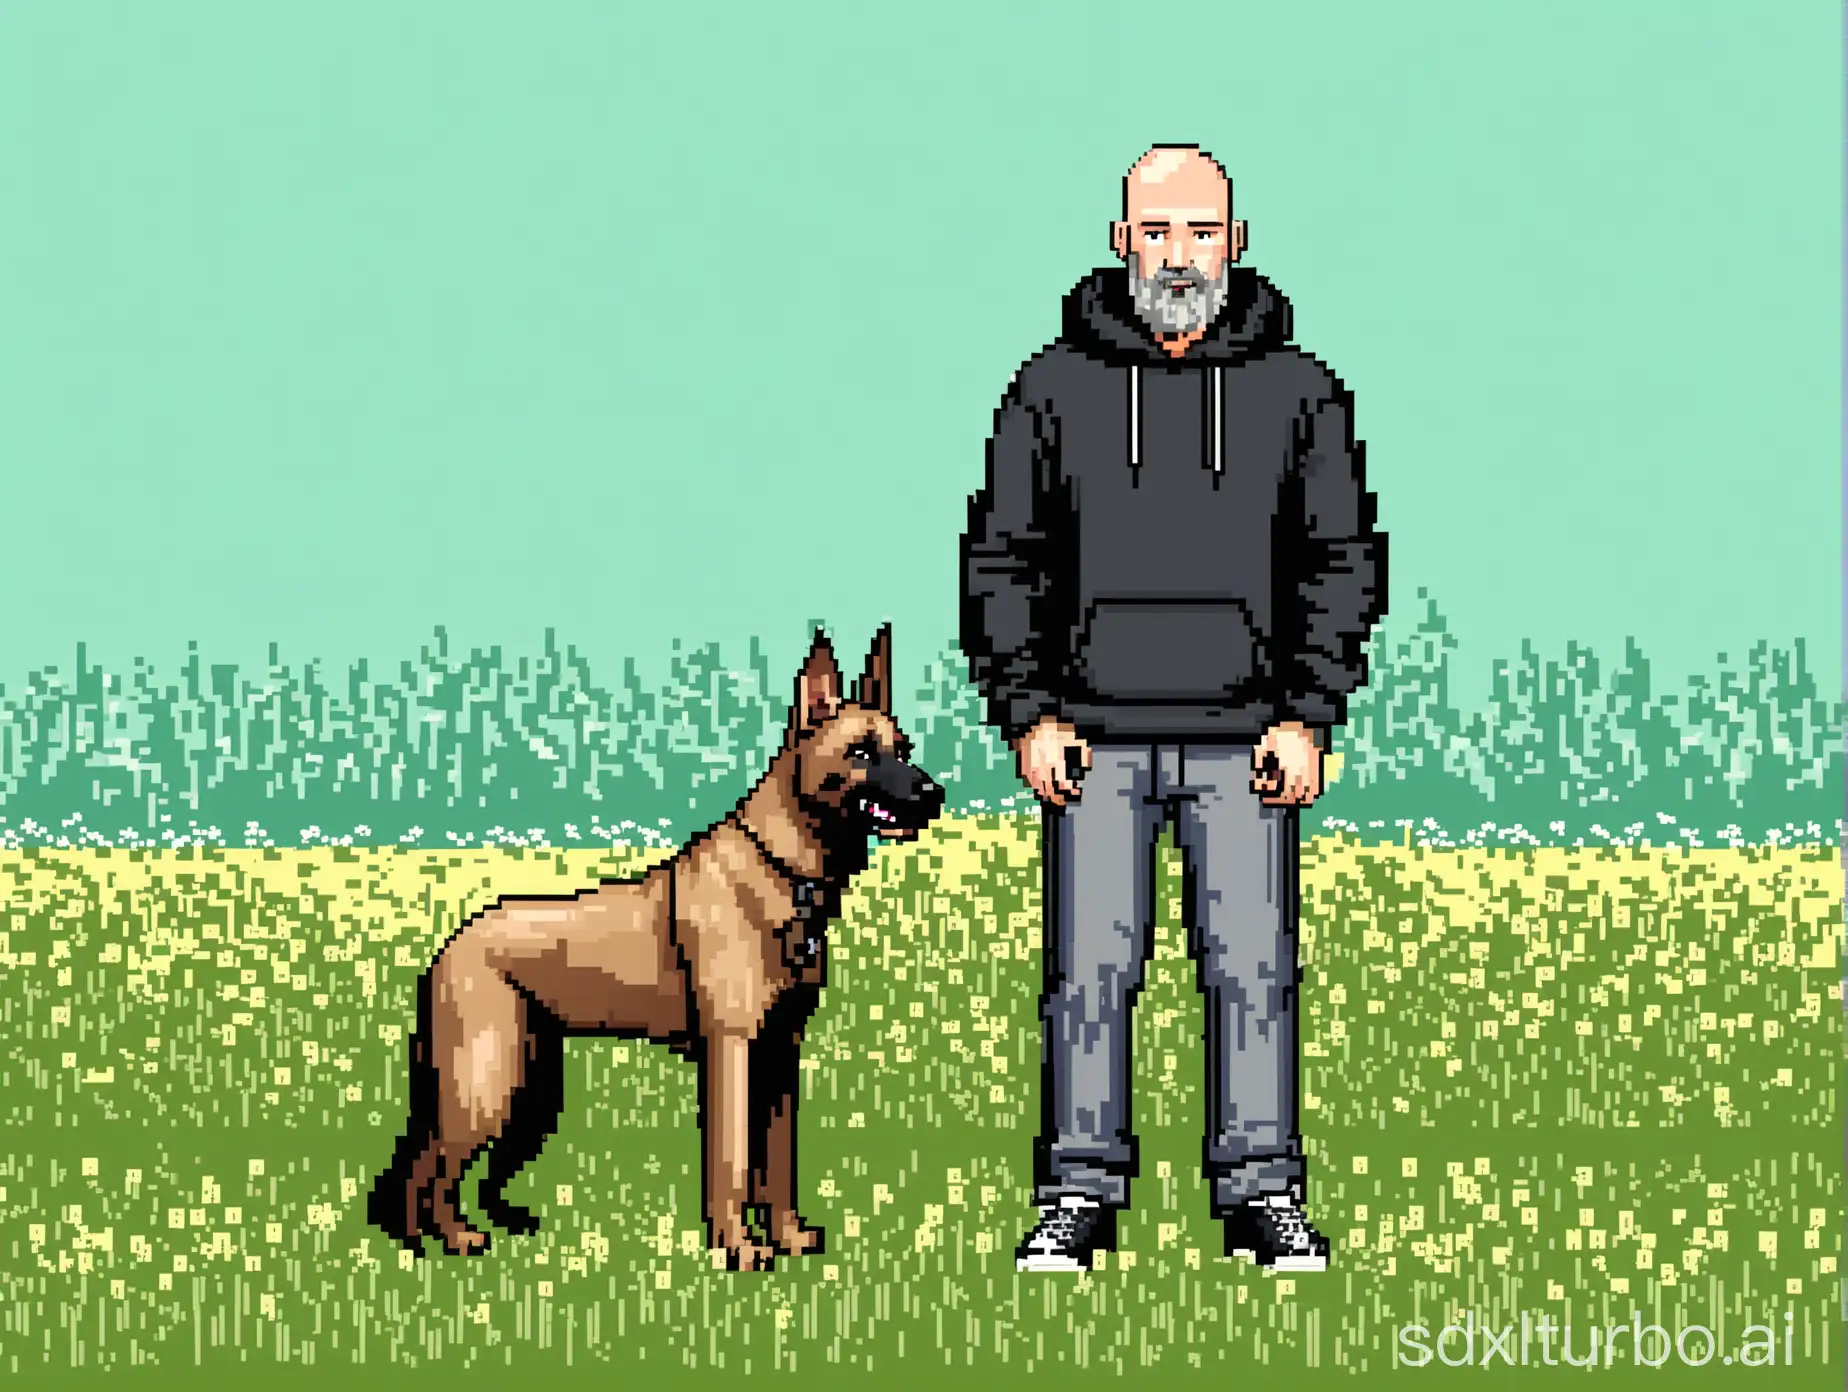 Gray-Bearded-Man-in-Black-Hoodie-and-His-Malinois-Companion-on-a-Meadow-8bit-Art